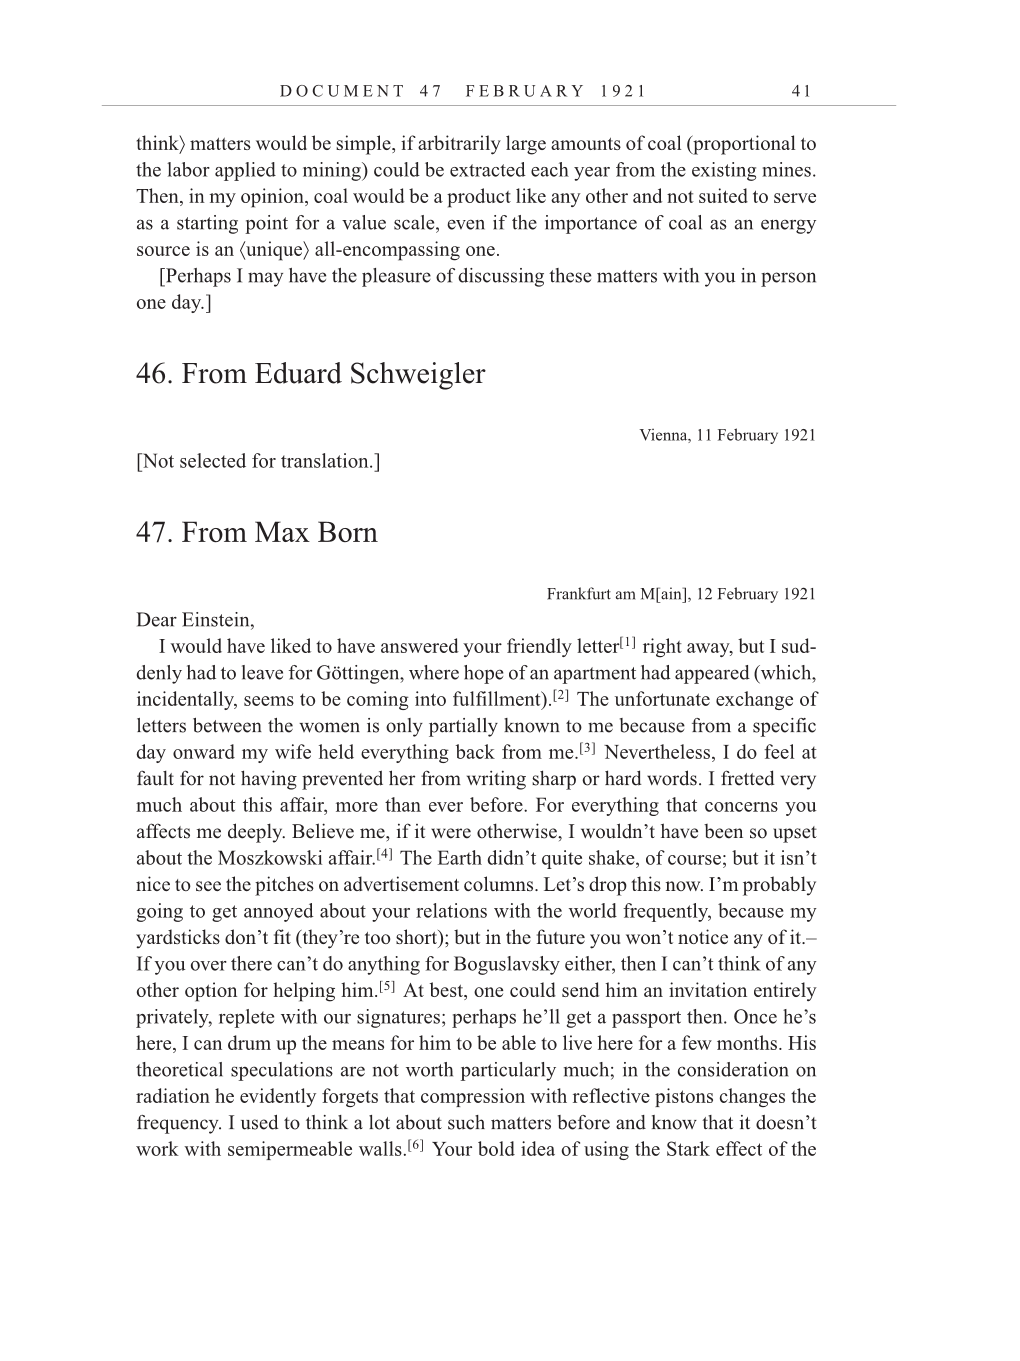 Volume 12: The Berlin Years: Correspondence, January-December 1921 (English translation supplement) page 41